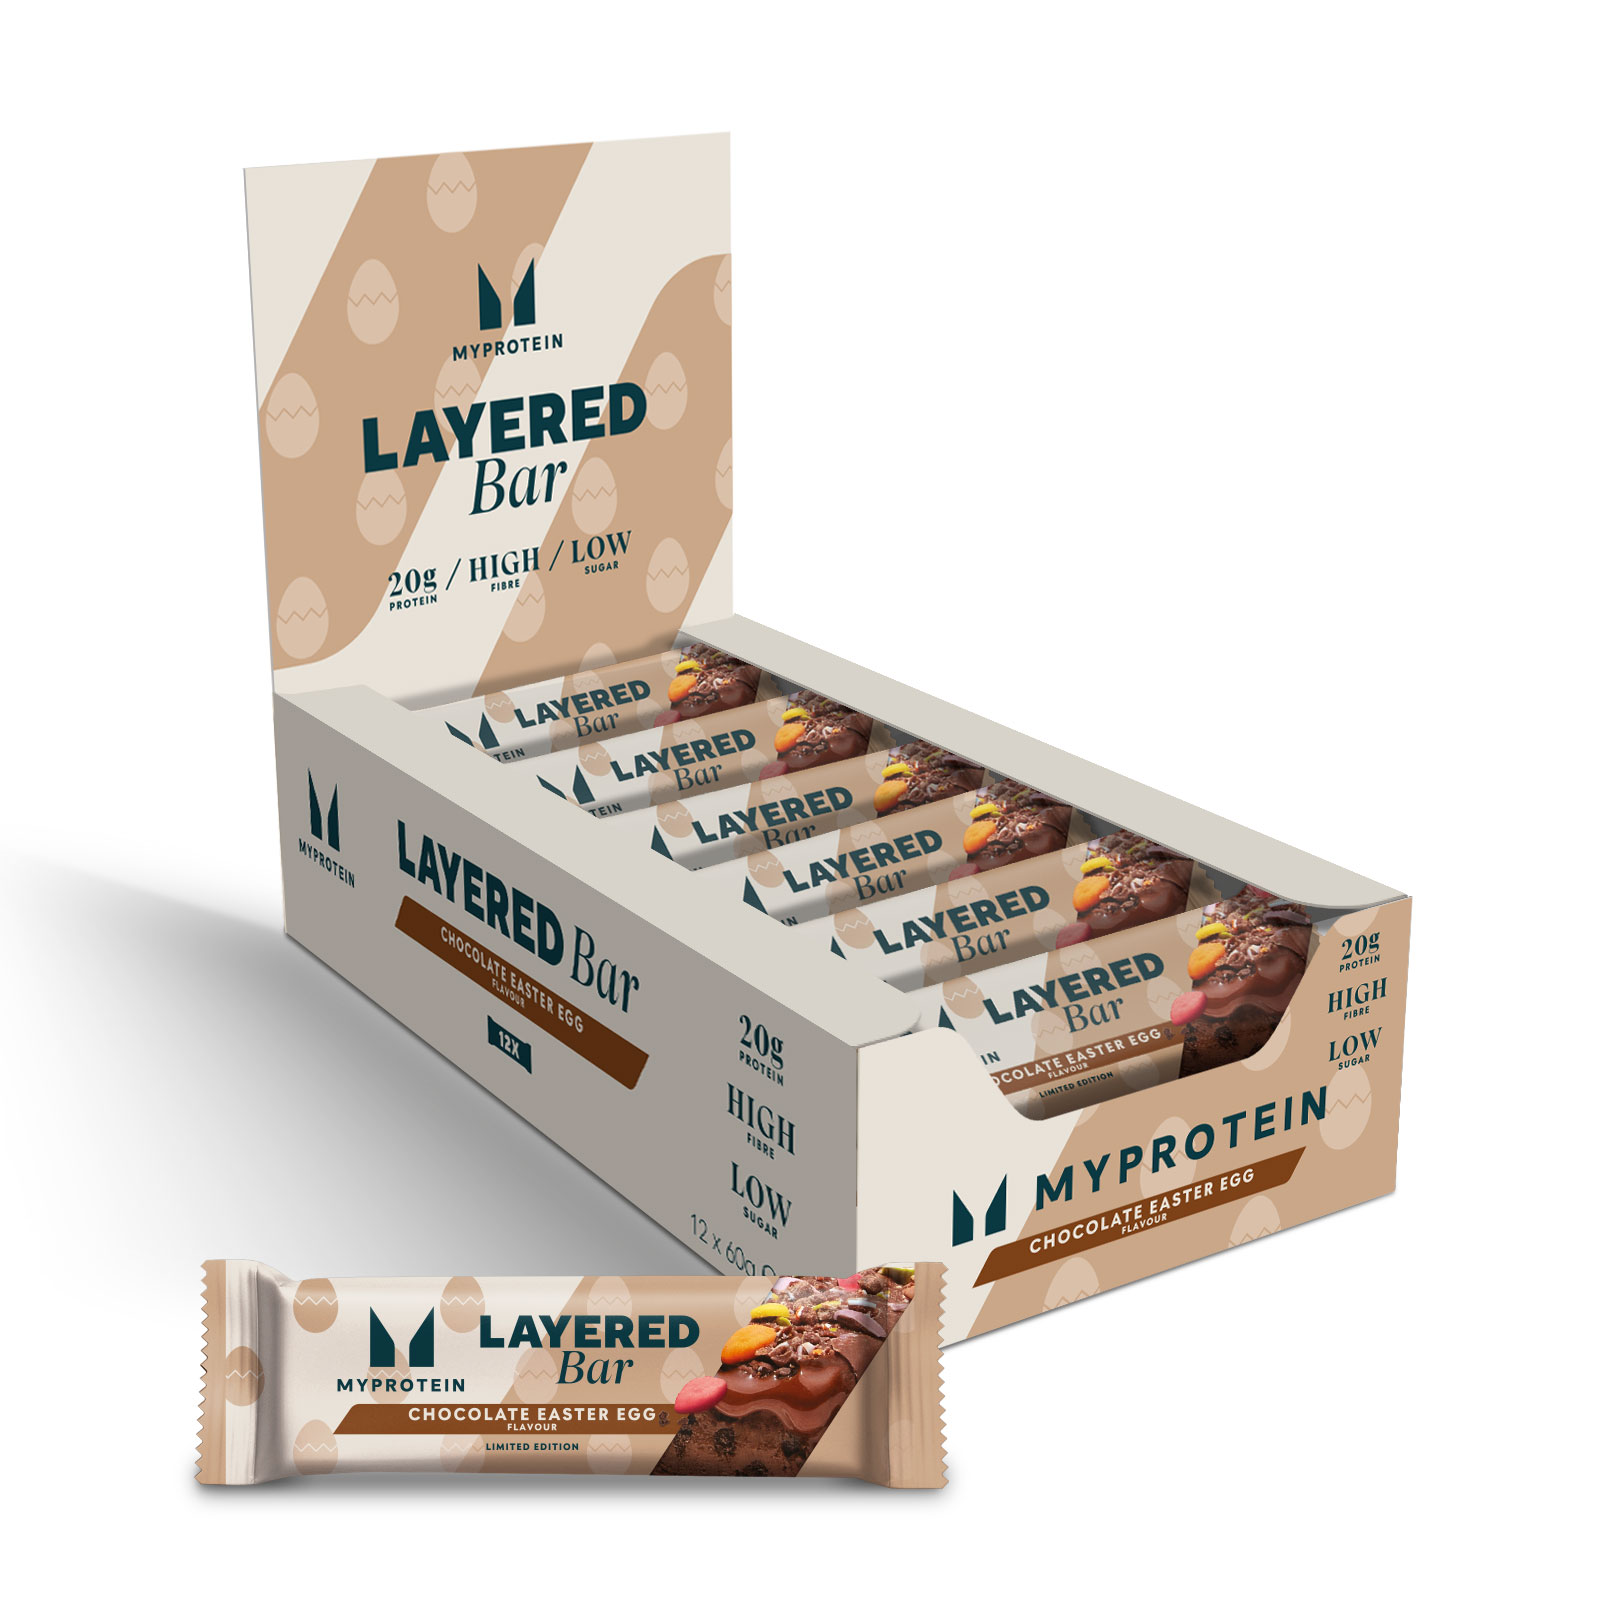 Limited Edition Layered Protein Bar - Easter Egg